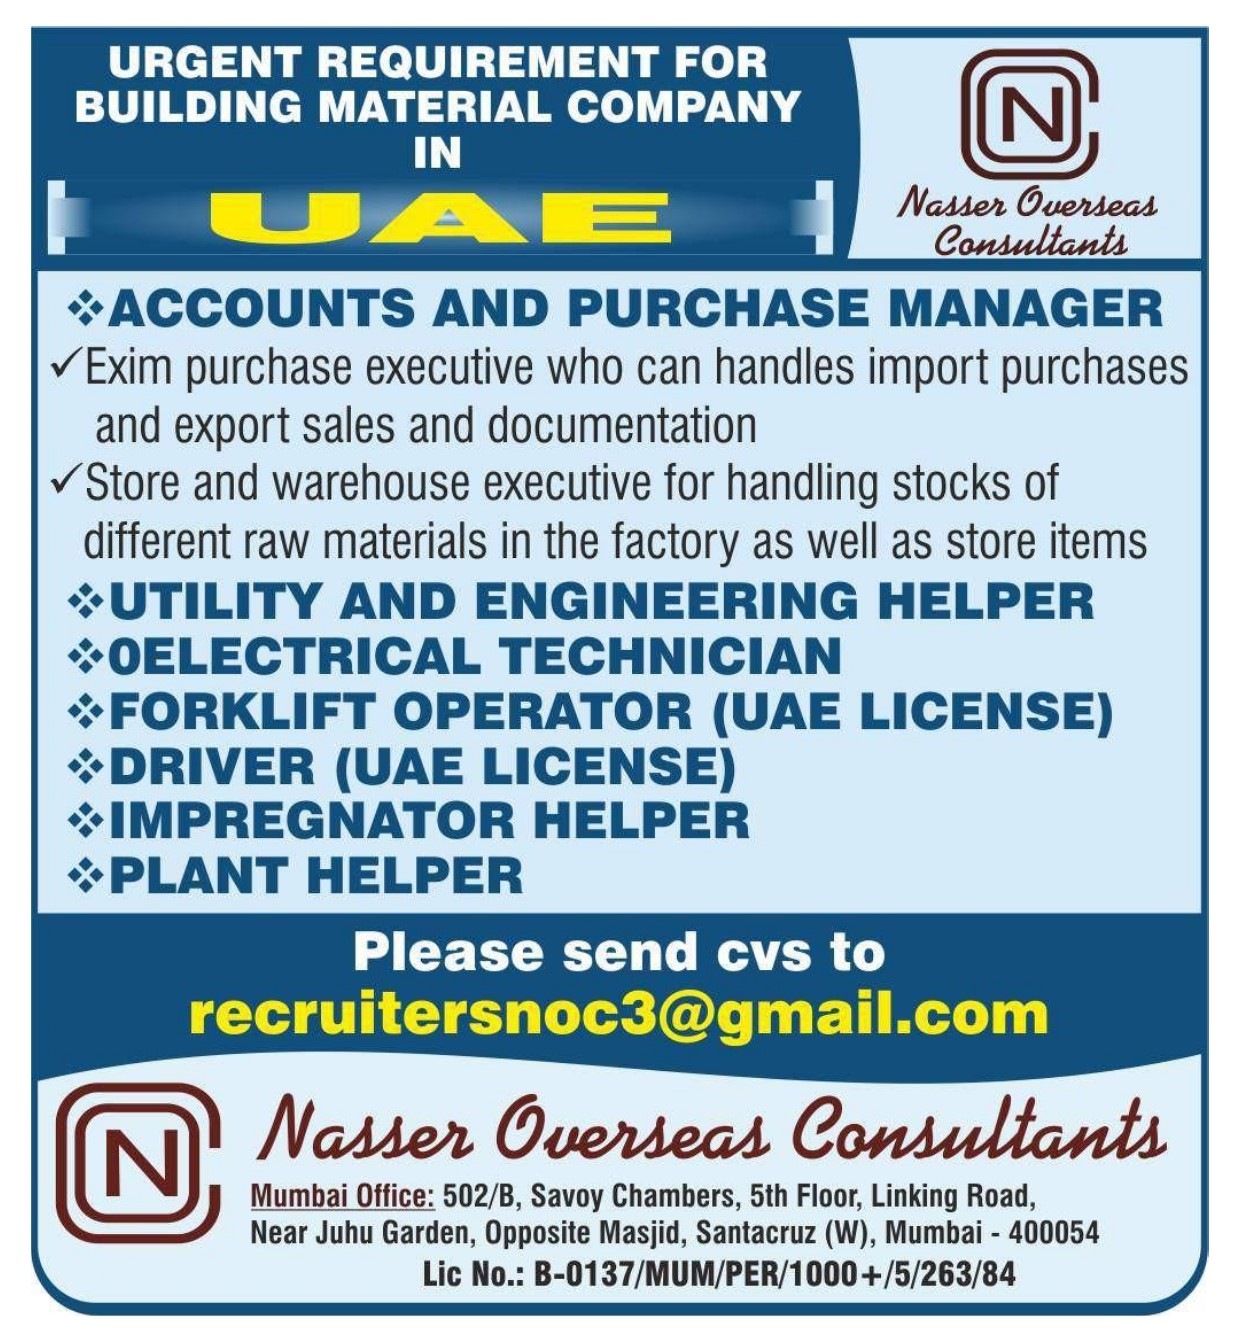 Hiring for Building Mterial Company UAE